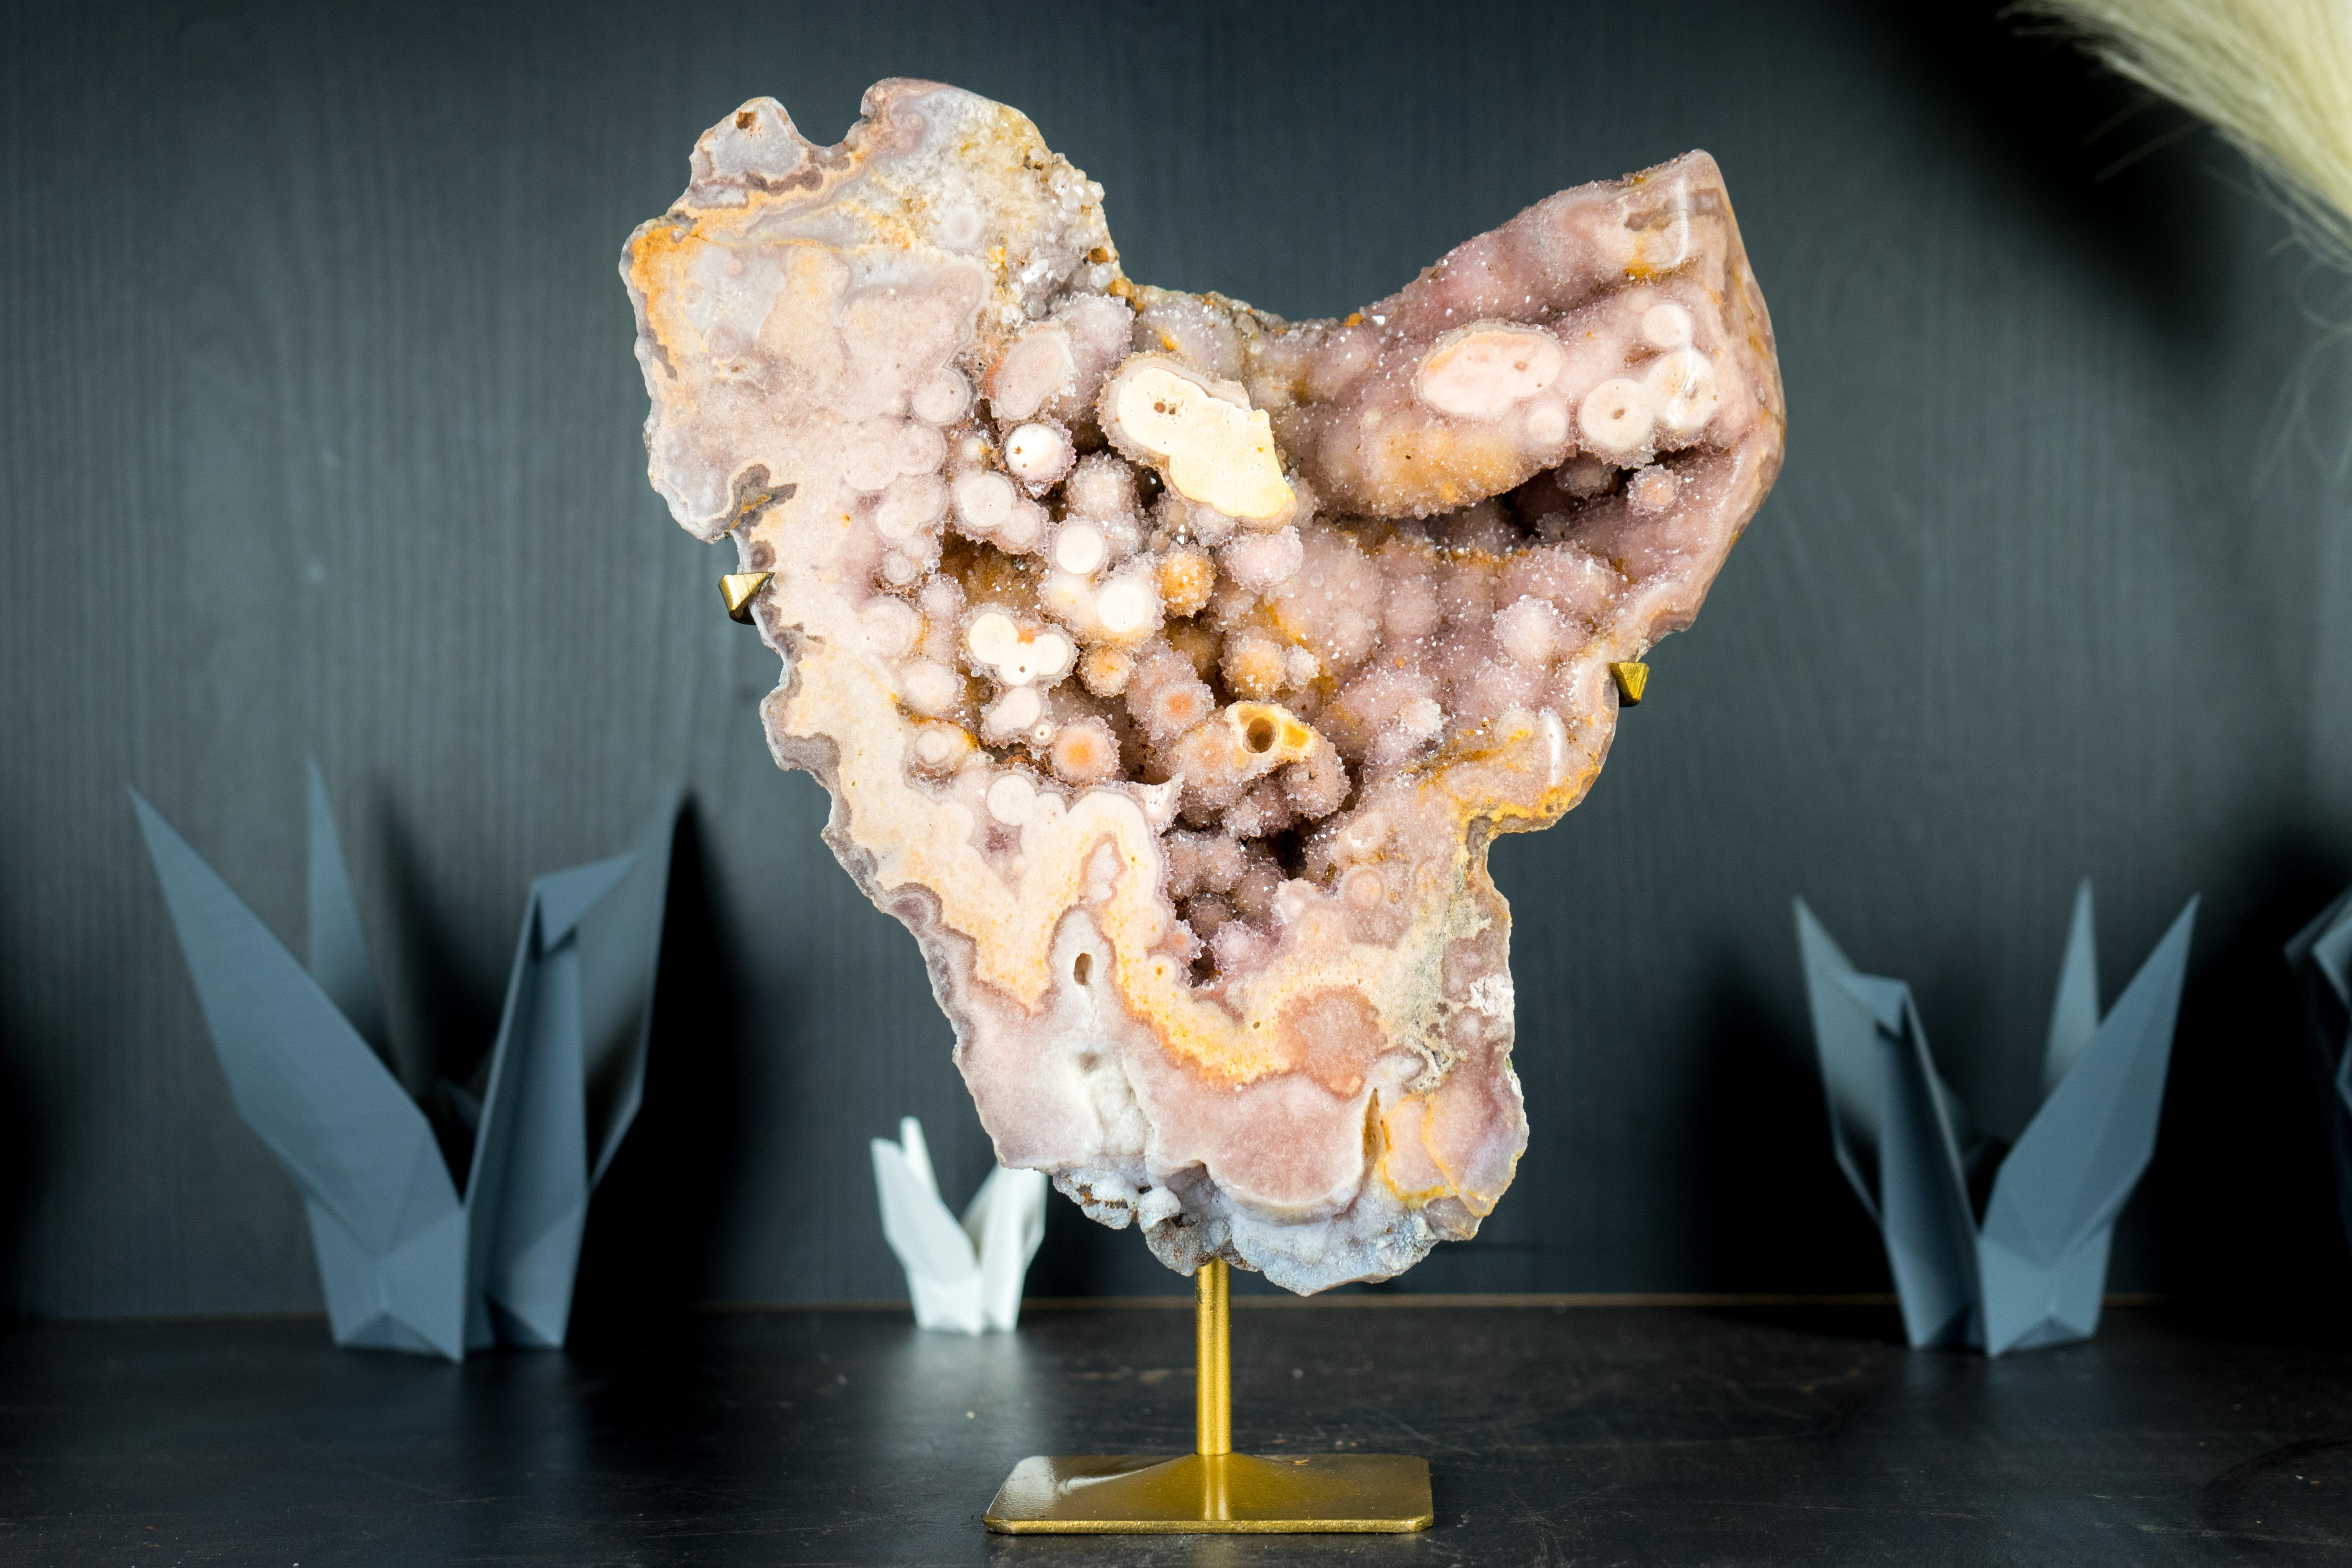 You might be wondering: are these yellow and rose hues completely natural? Indeed, the yellow and rose tones visible in this Pink Amethyst geode slab are entirely natural and are one of the rarest color schemes to be found on Pink Amethysts. The